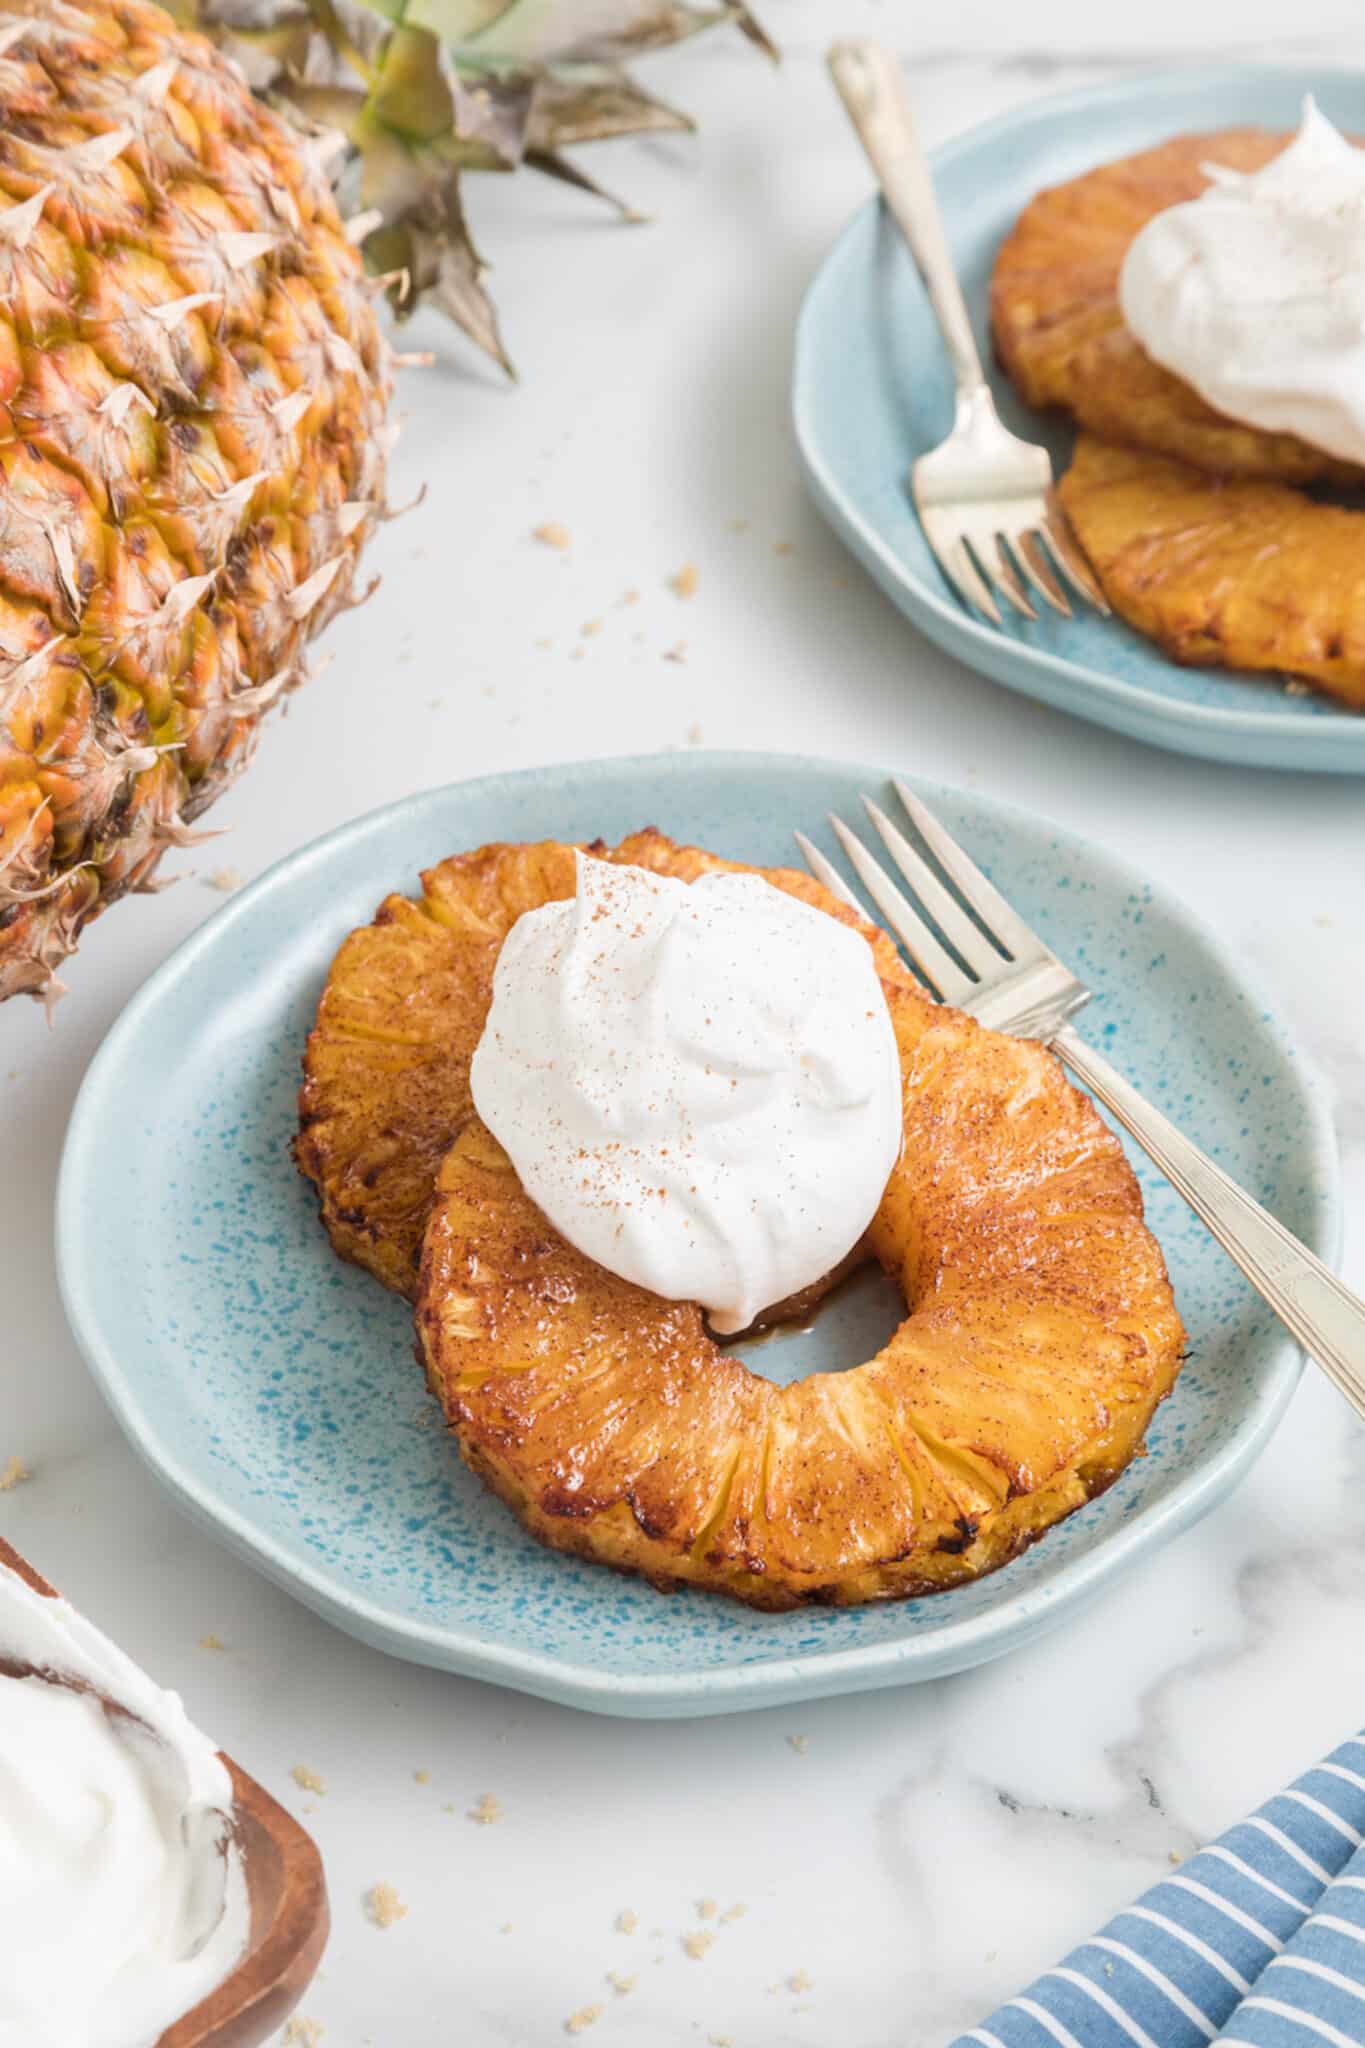 https://www.cleaneatingkitchen.com/wp-content/uploads/2022/06/air-fryer-pineapple-with-cream-hero-scaled.jpg